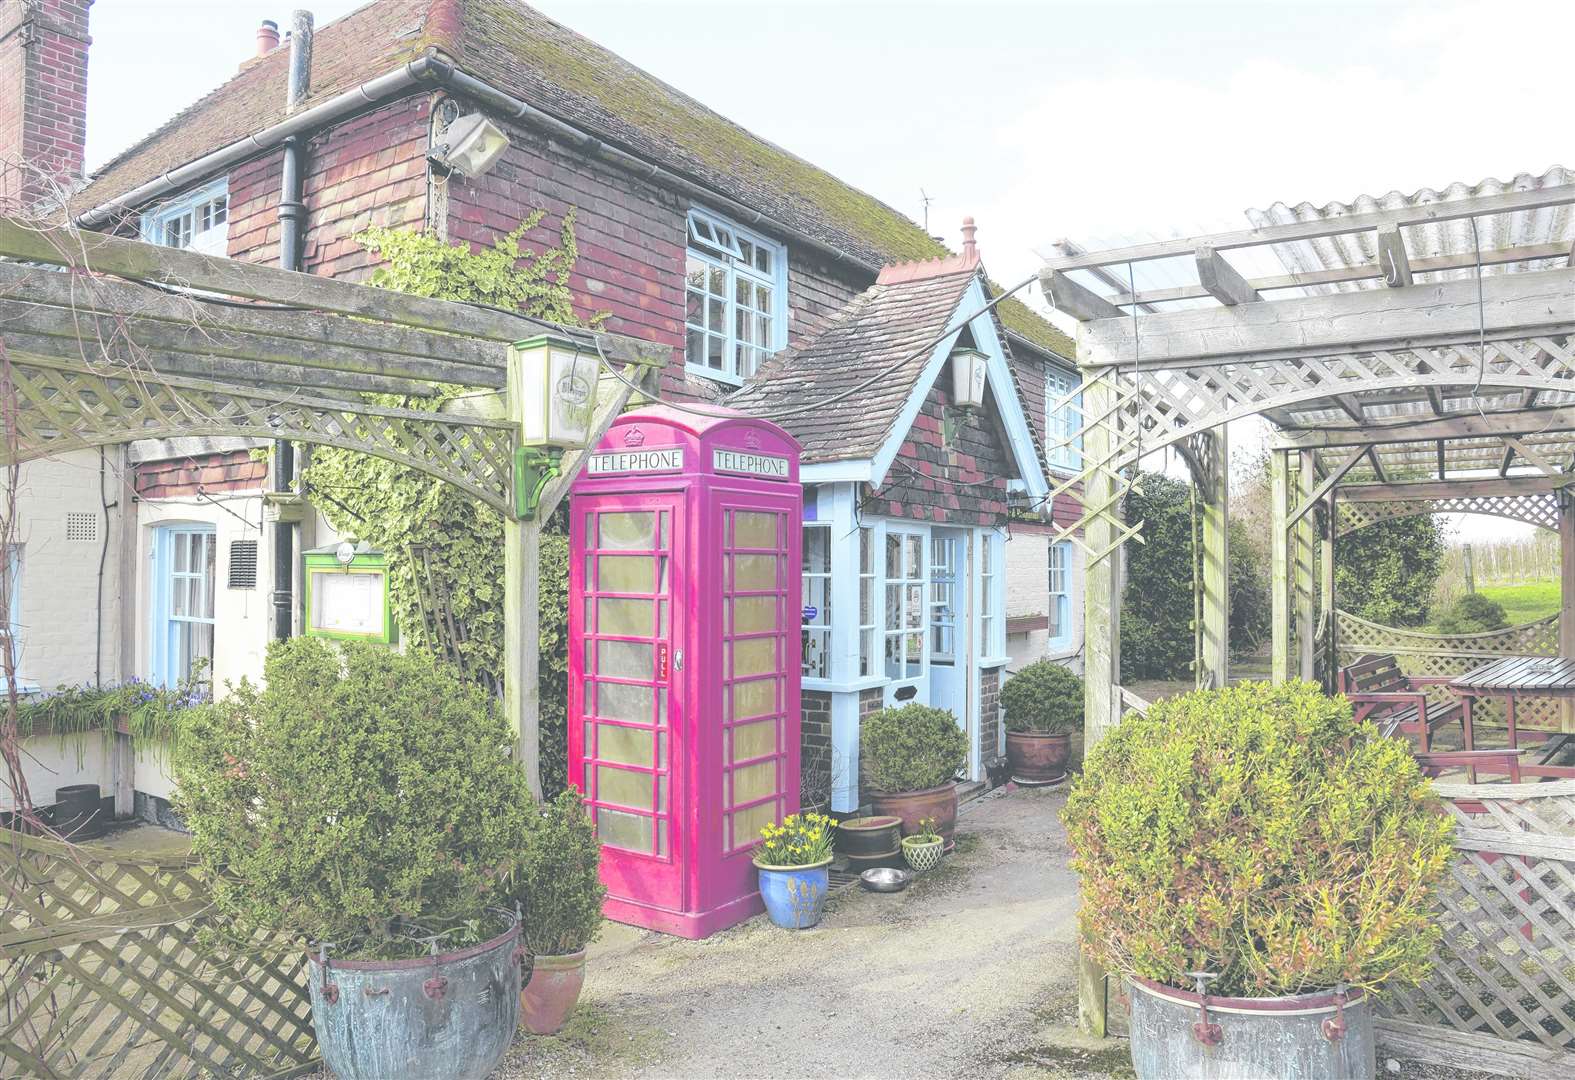 Micropub bid ditched but old village inn could become home - Kent Online